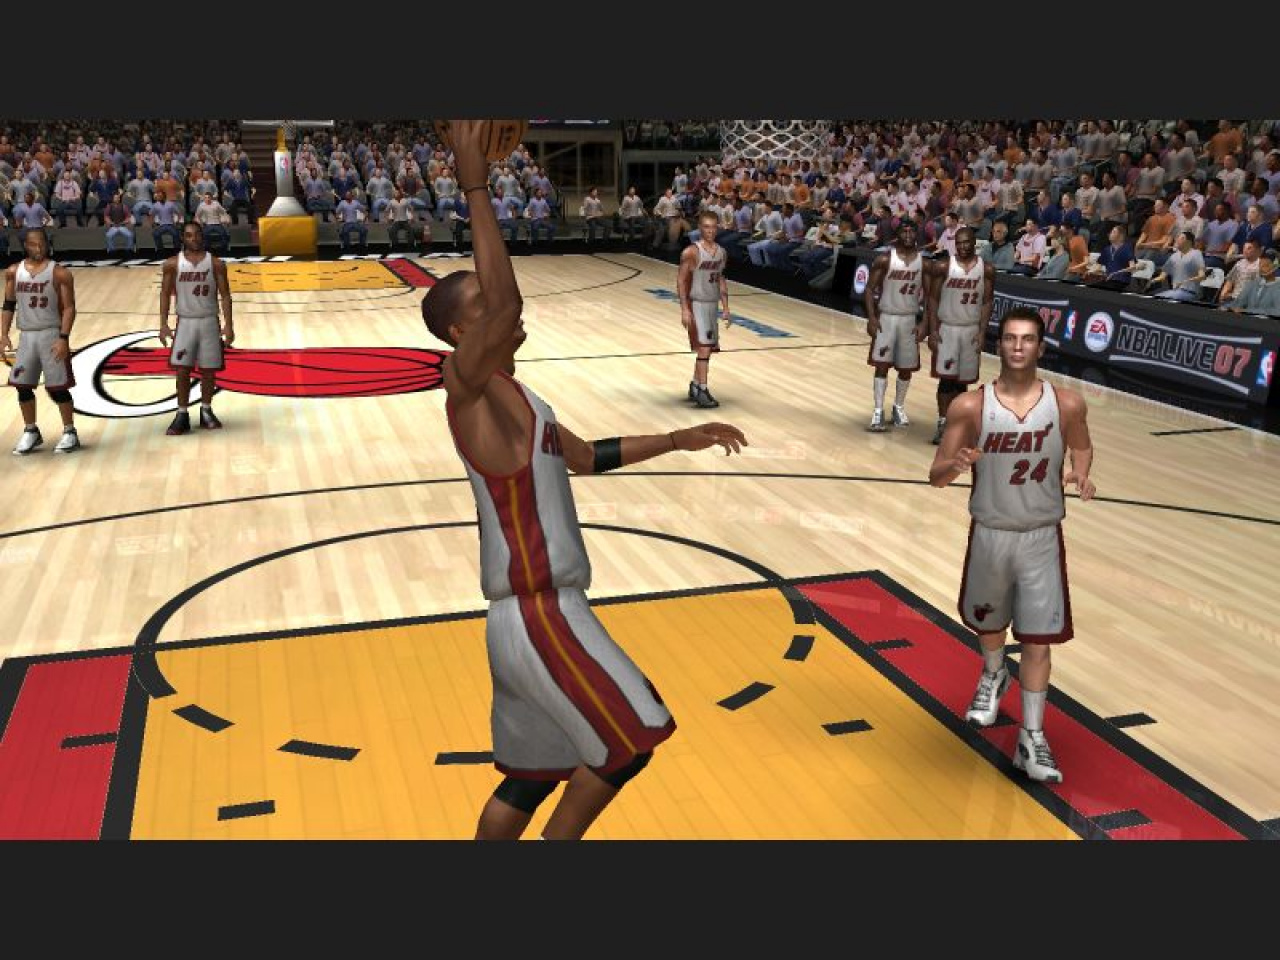 NBA Live 07 Video Game Reviews and Previews PC, PS4, Xbox One and mobile